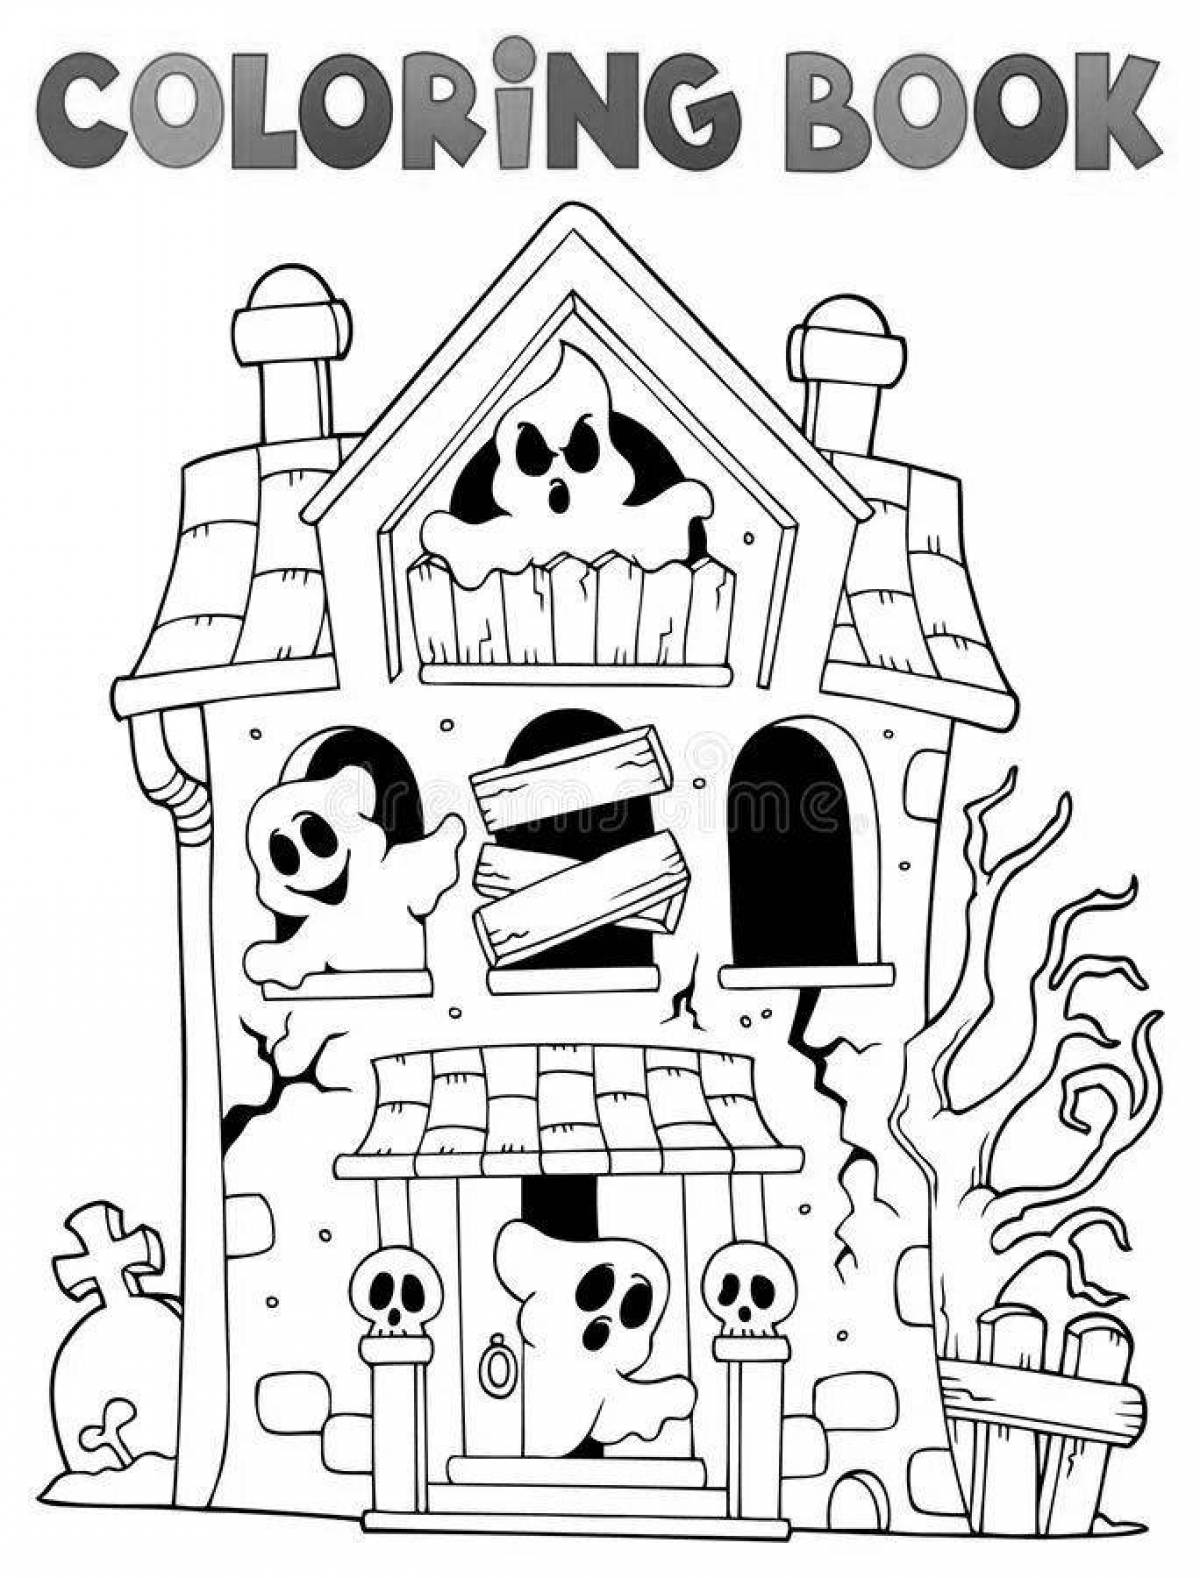 Coloring page wonderful haunted house